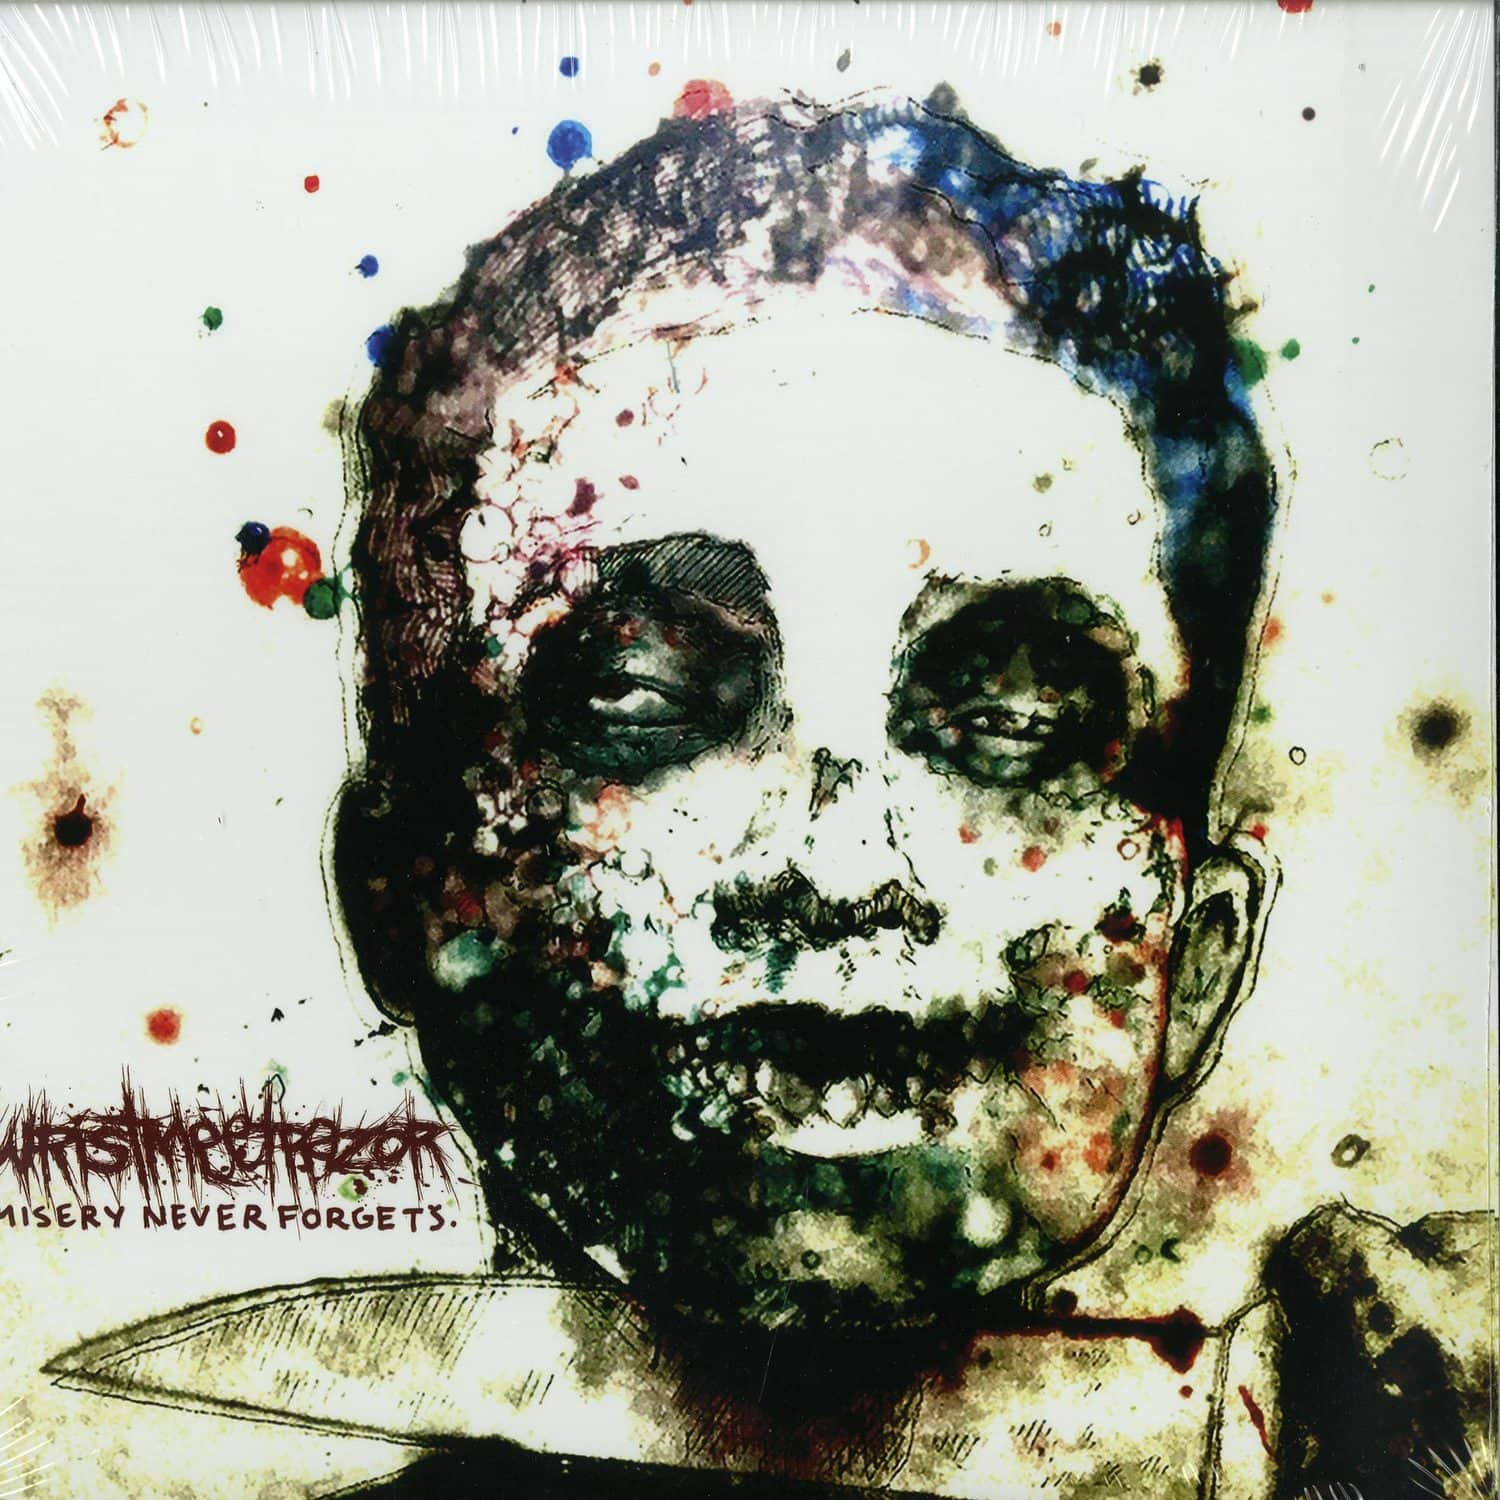 Wristmeetrazor - MISERY NEVER FORGETS 